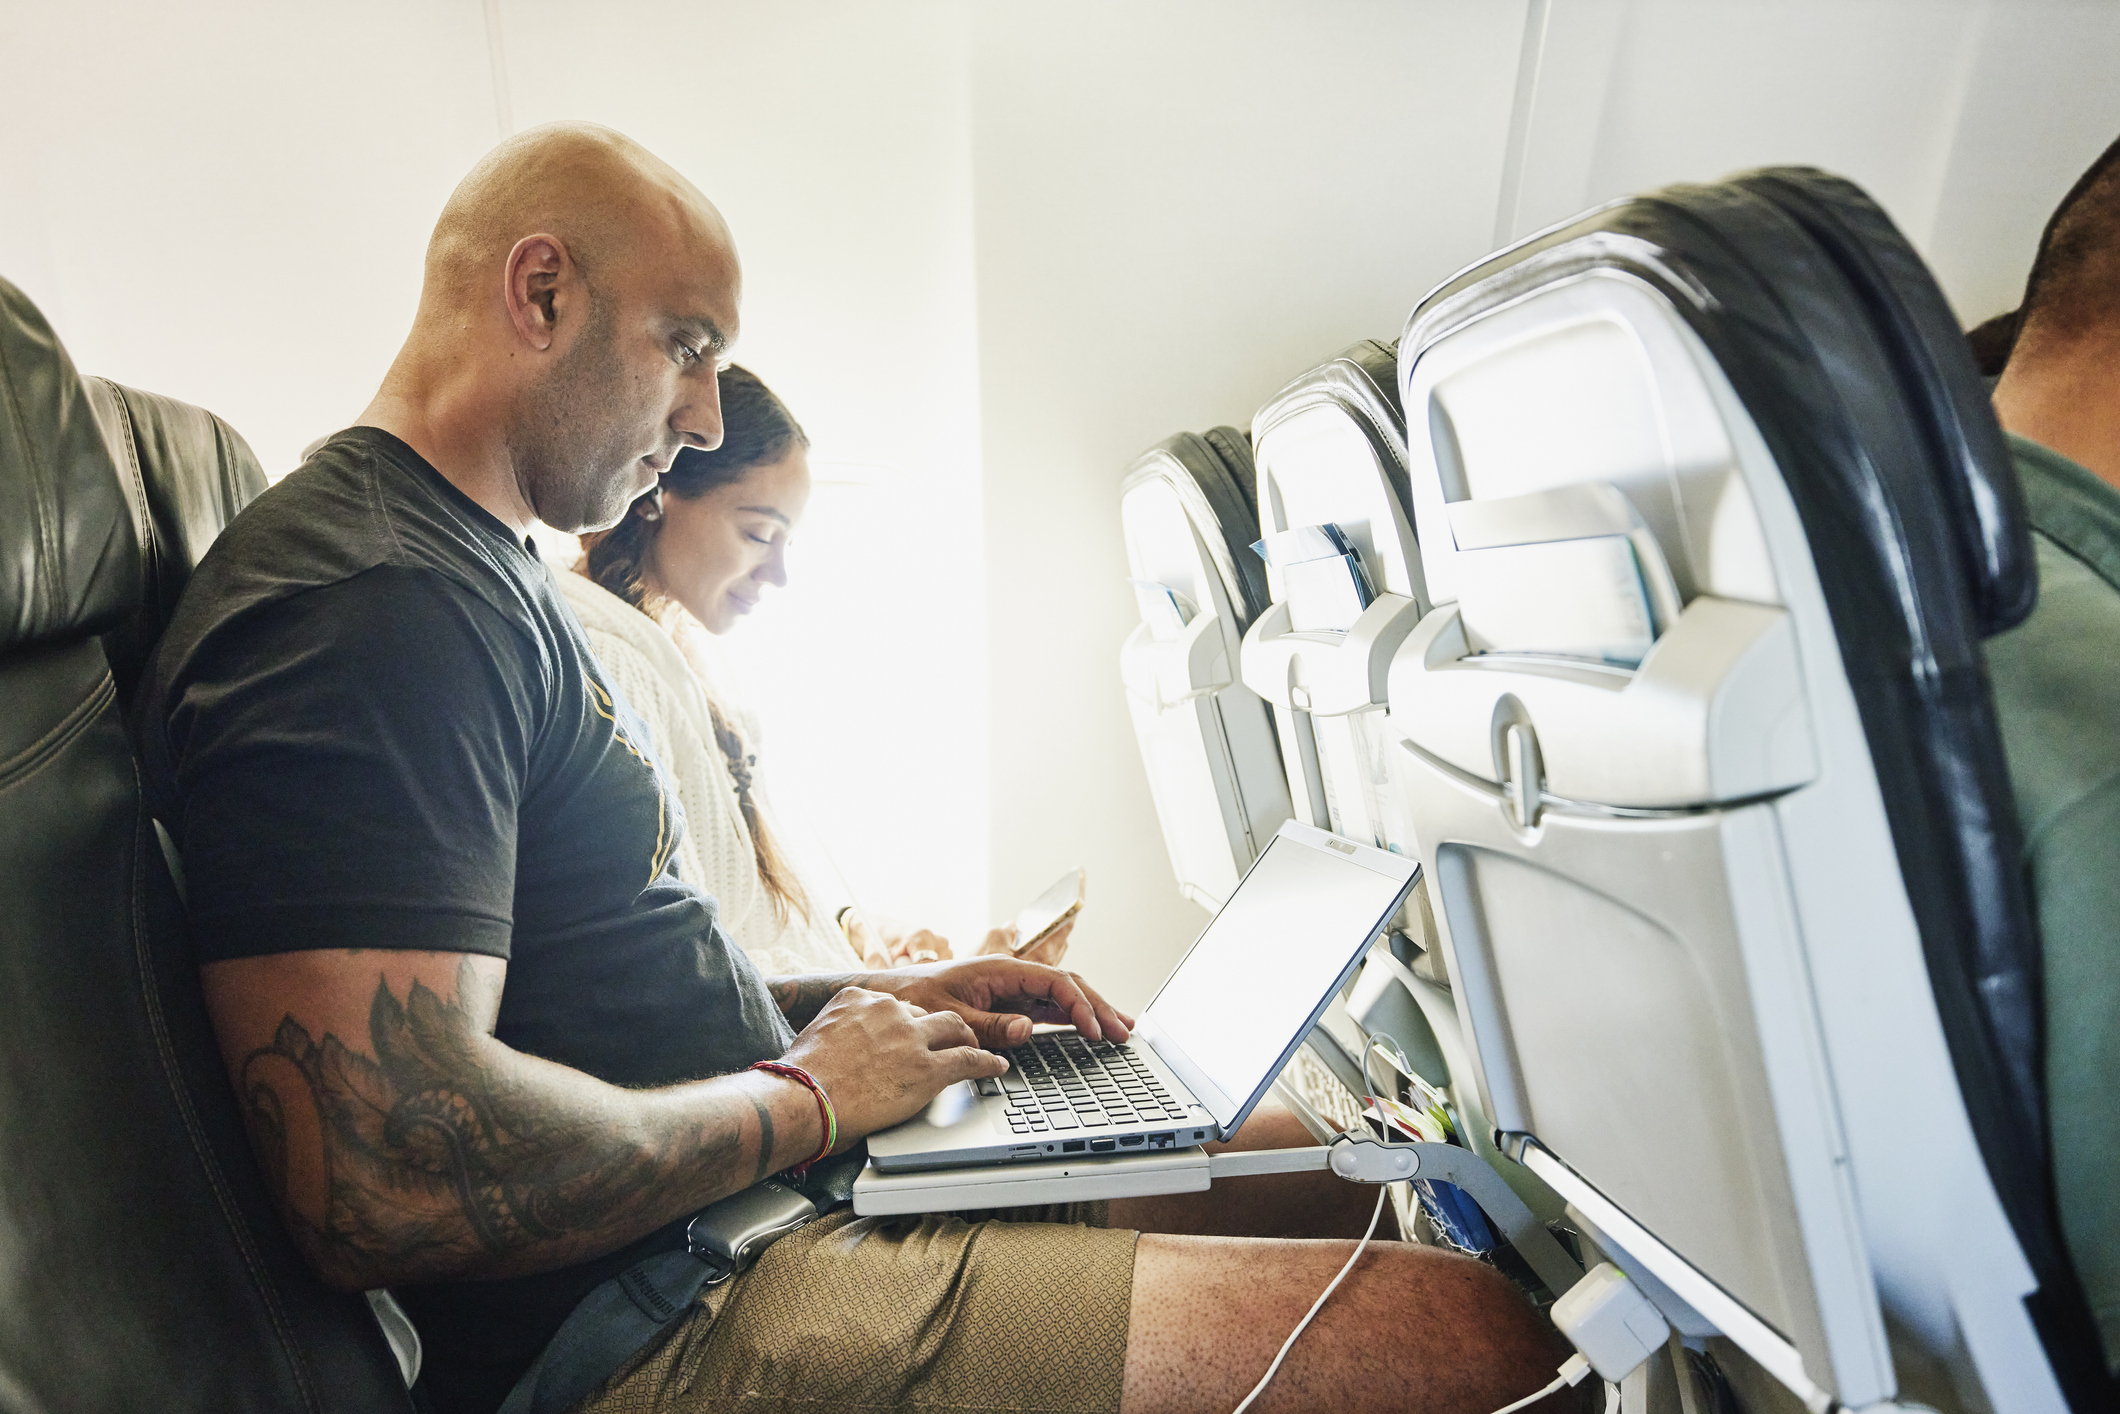 Medium shot of couple working on smart phone and laptop on airplane